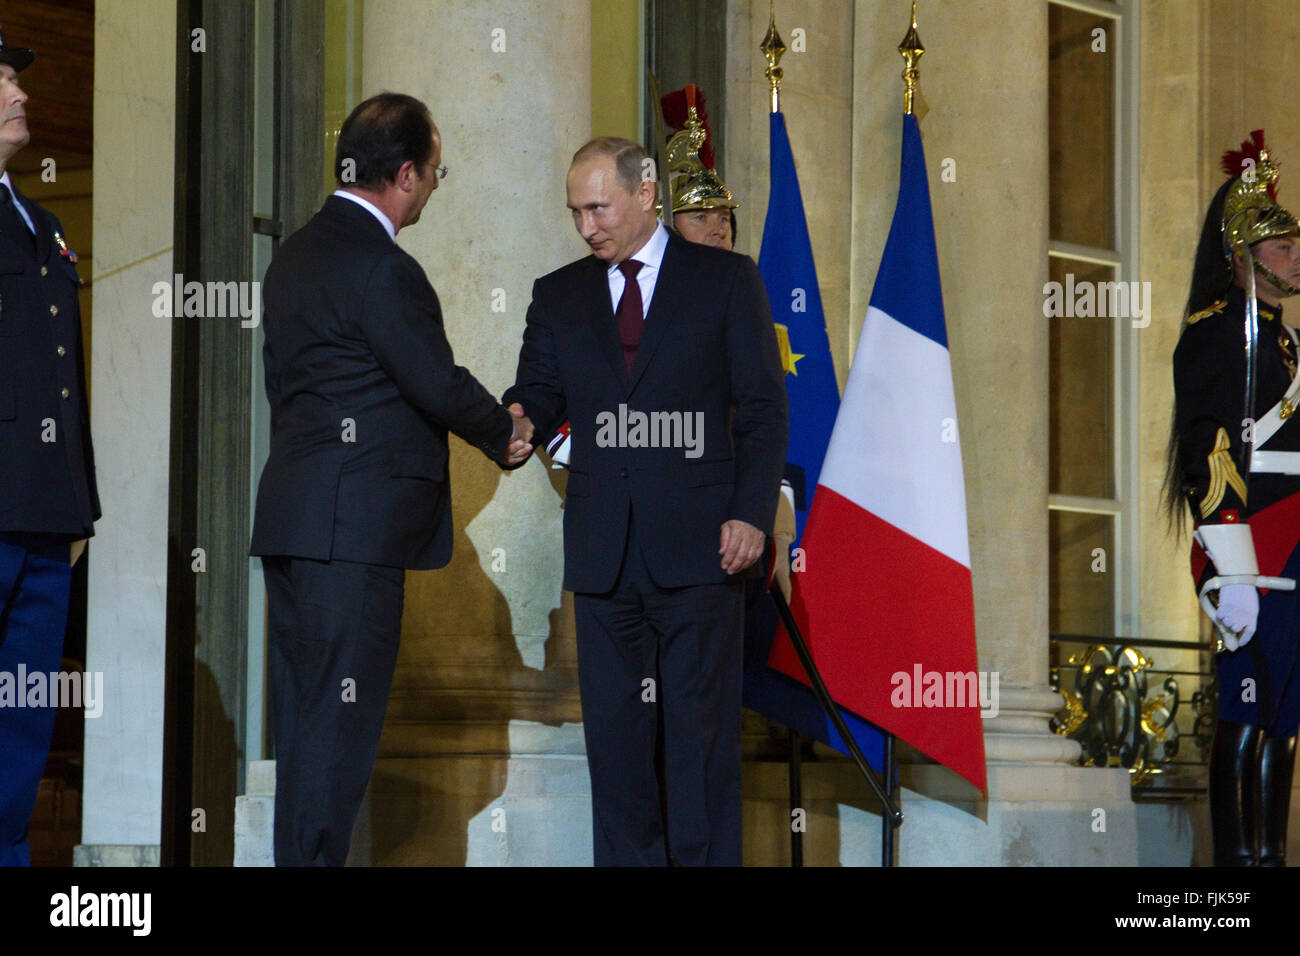 Vladimir Putin Russian President visit to Paris shaking hands with François Hollande French President at the Elysée palace Stock Photo